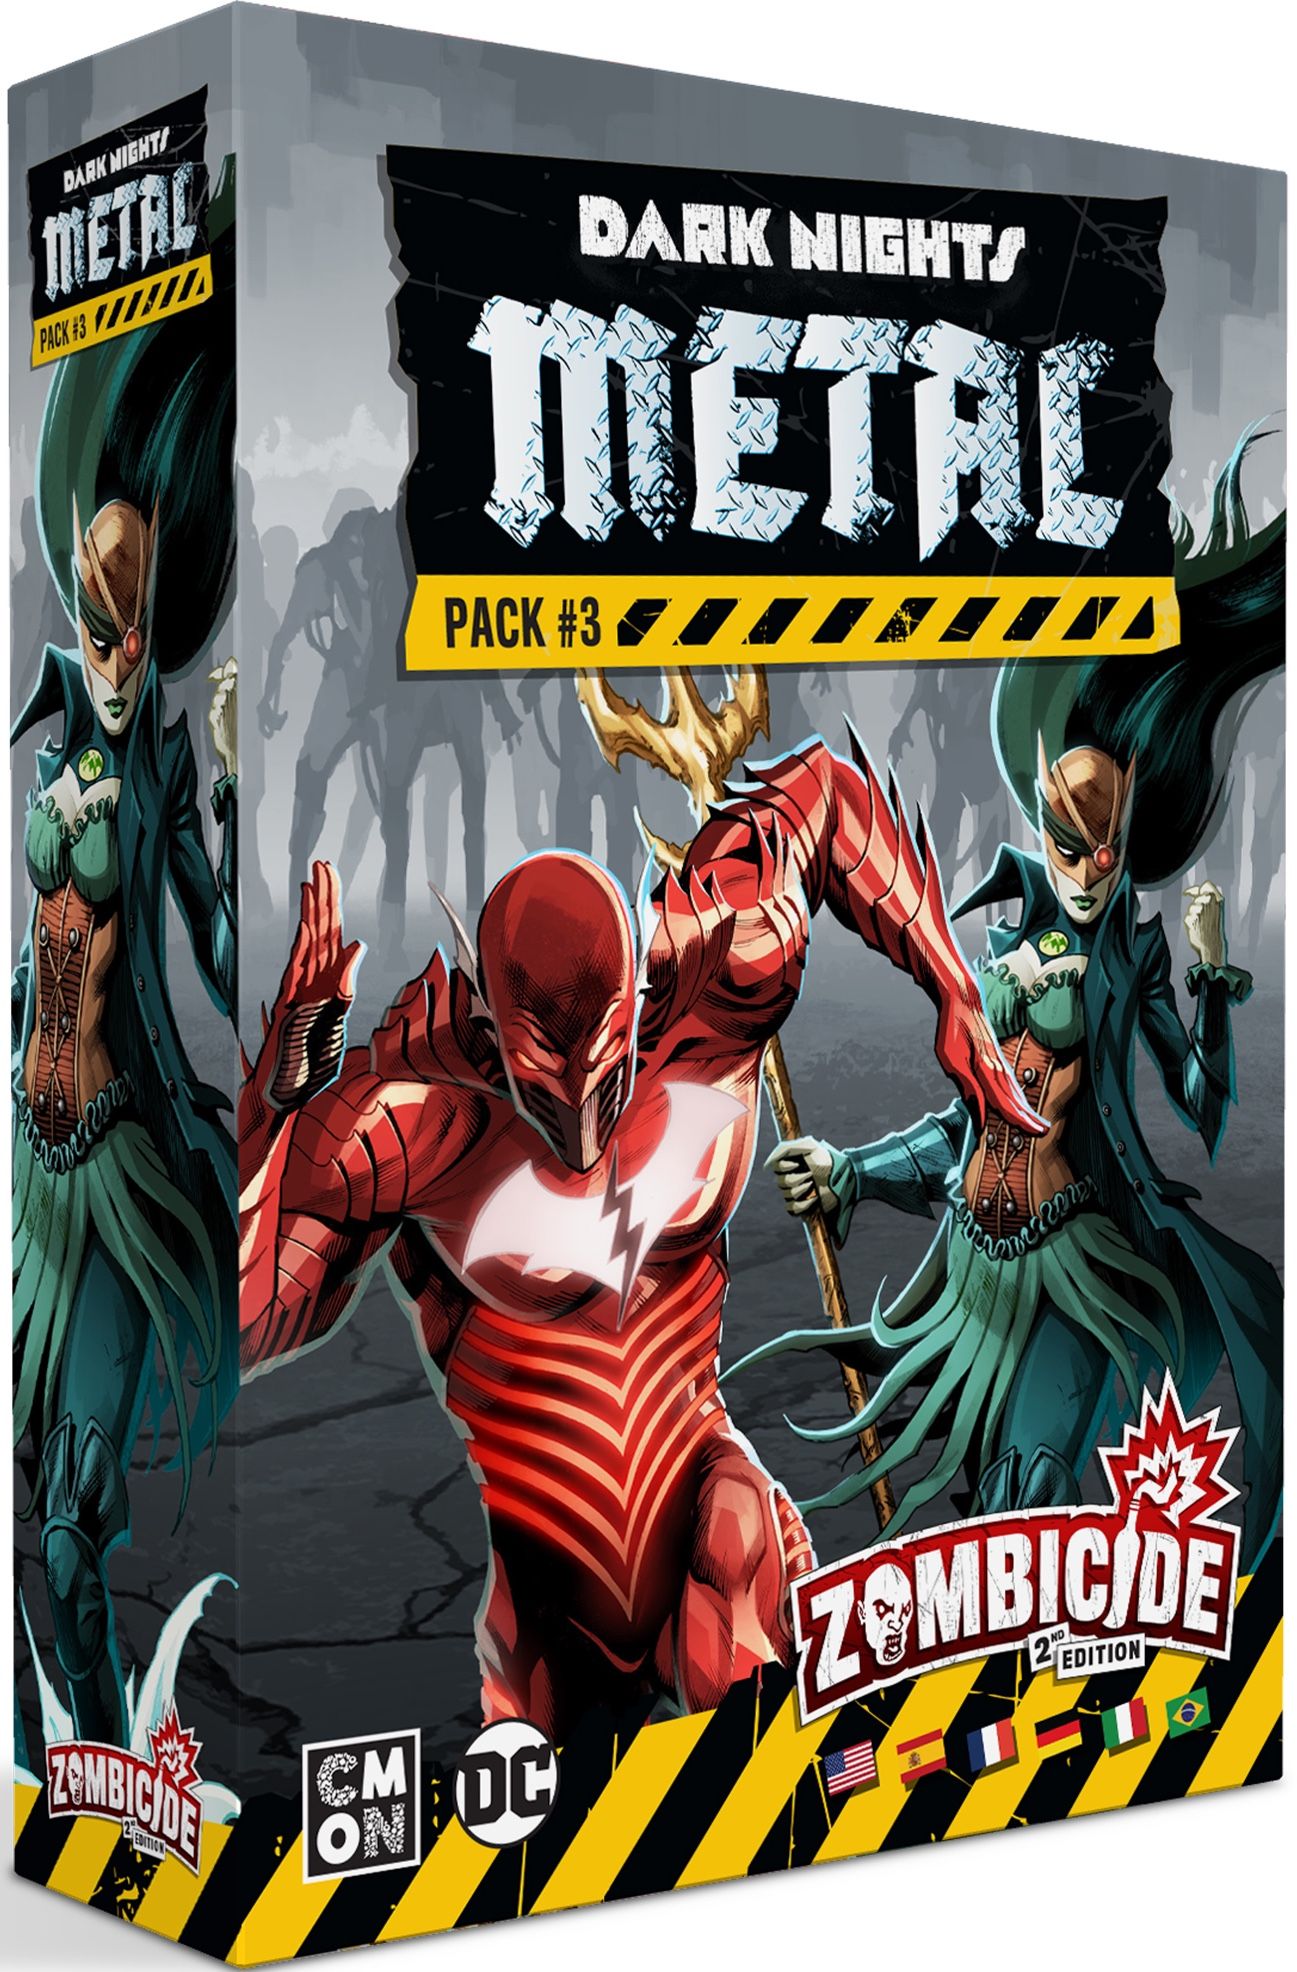 Cool Mini Or Not Zombicide: 2nd Edition – Dark Nights Metal: Pack #3